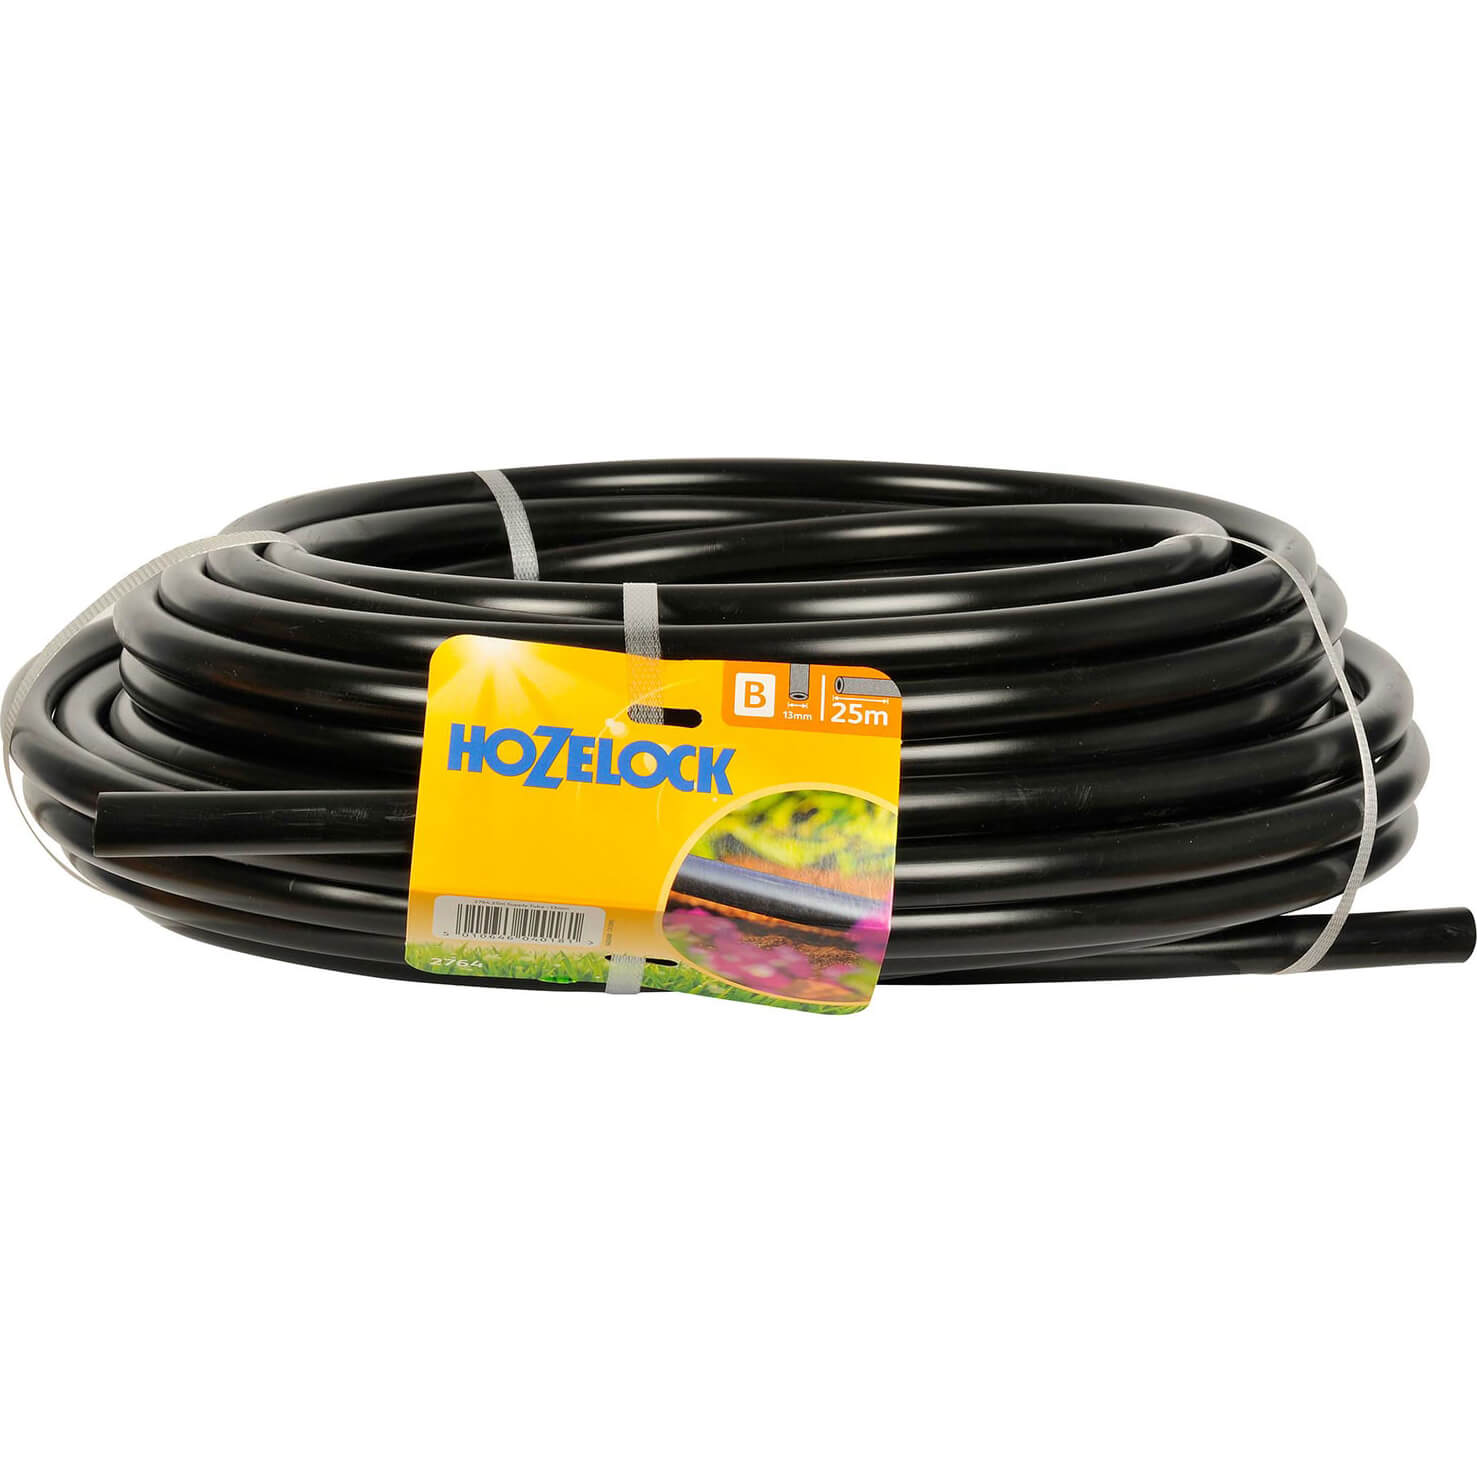 Photos - Other for Irrigation Hozelock MICRO Connecting Supply Hose Pipe 1/2" / 12.5mm 25m 2764 